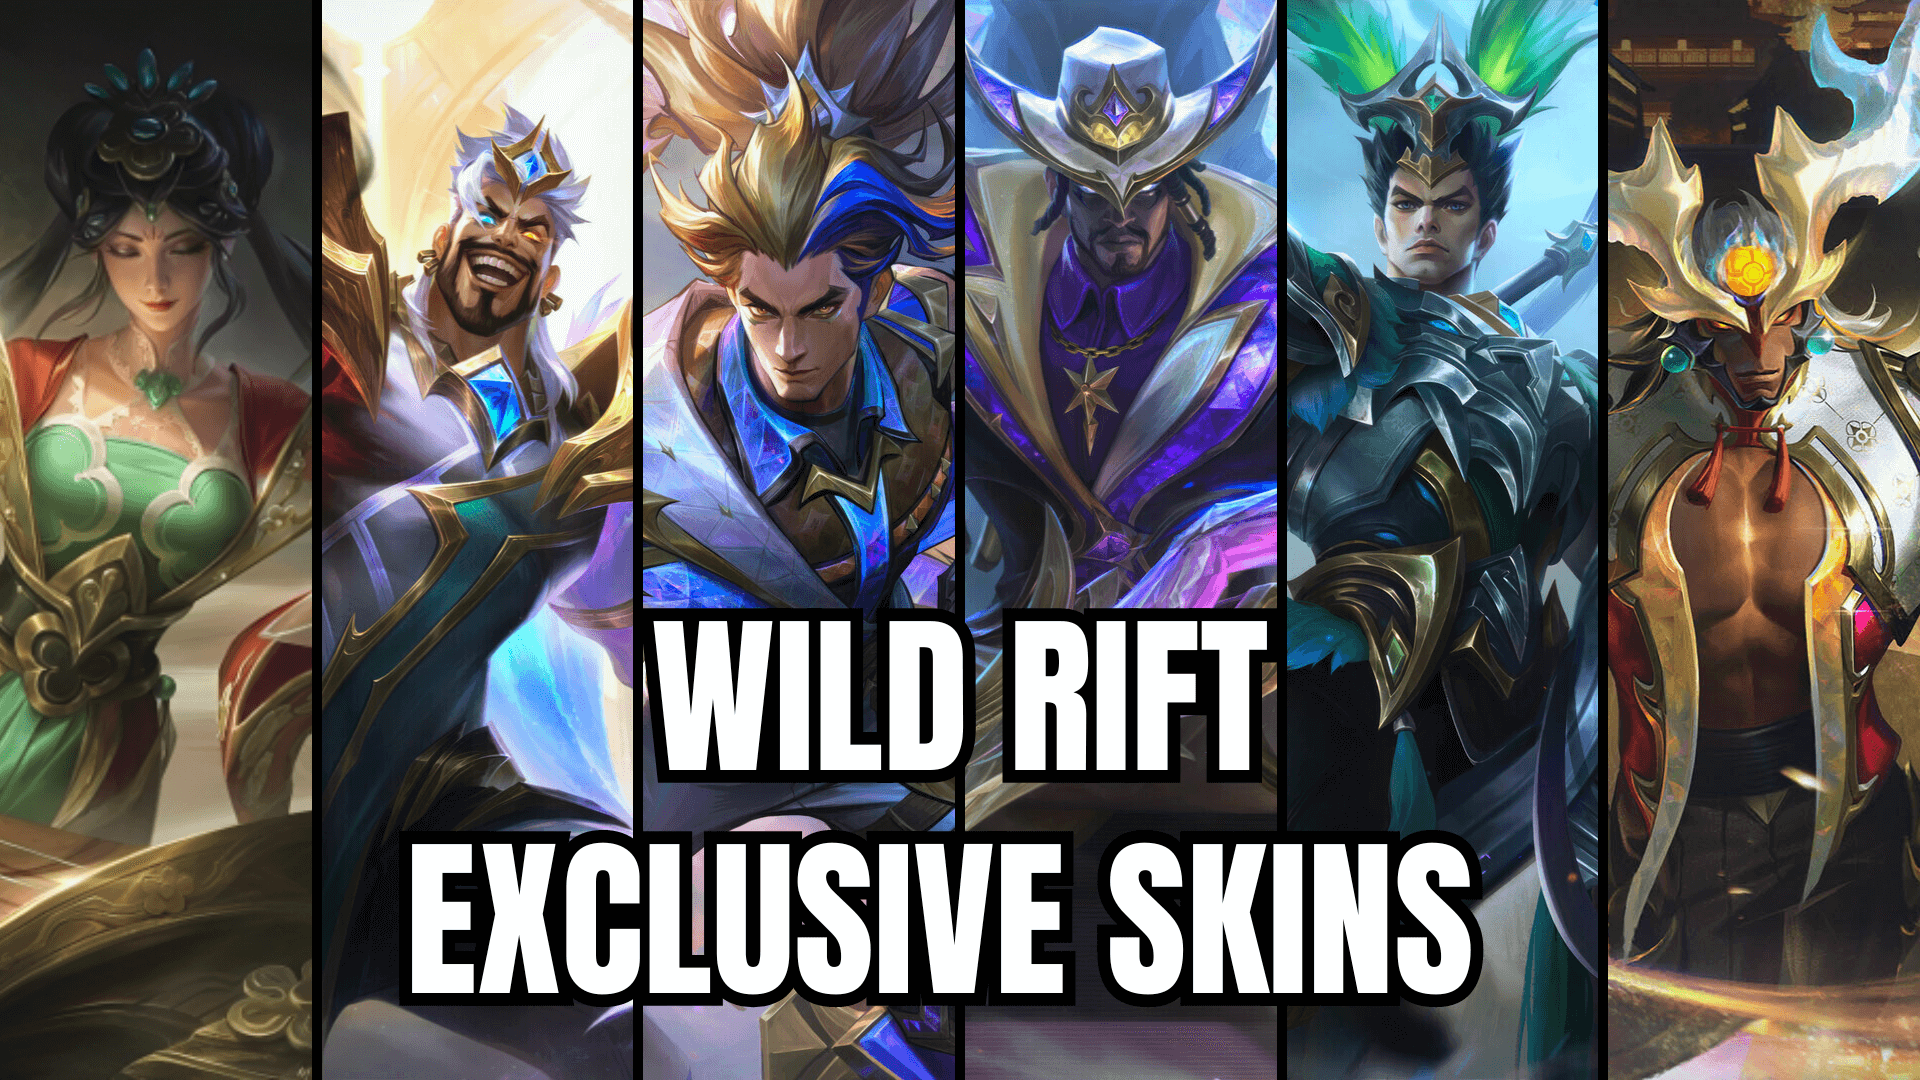 Complete List of Wild Rift Exclusive Skins (Up To Patch 5.1).